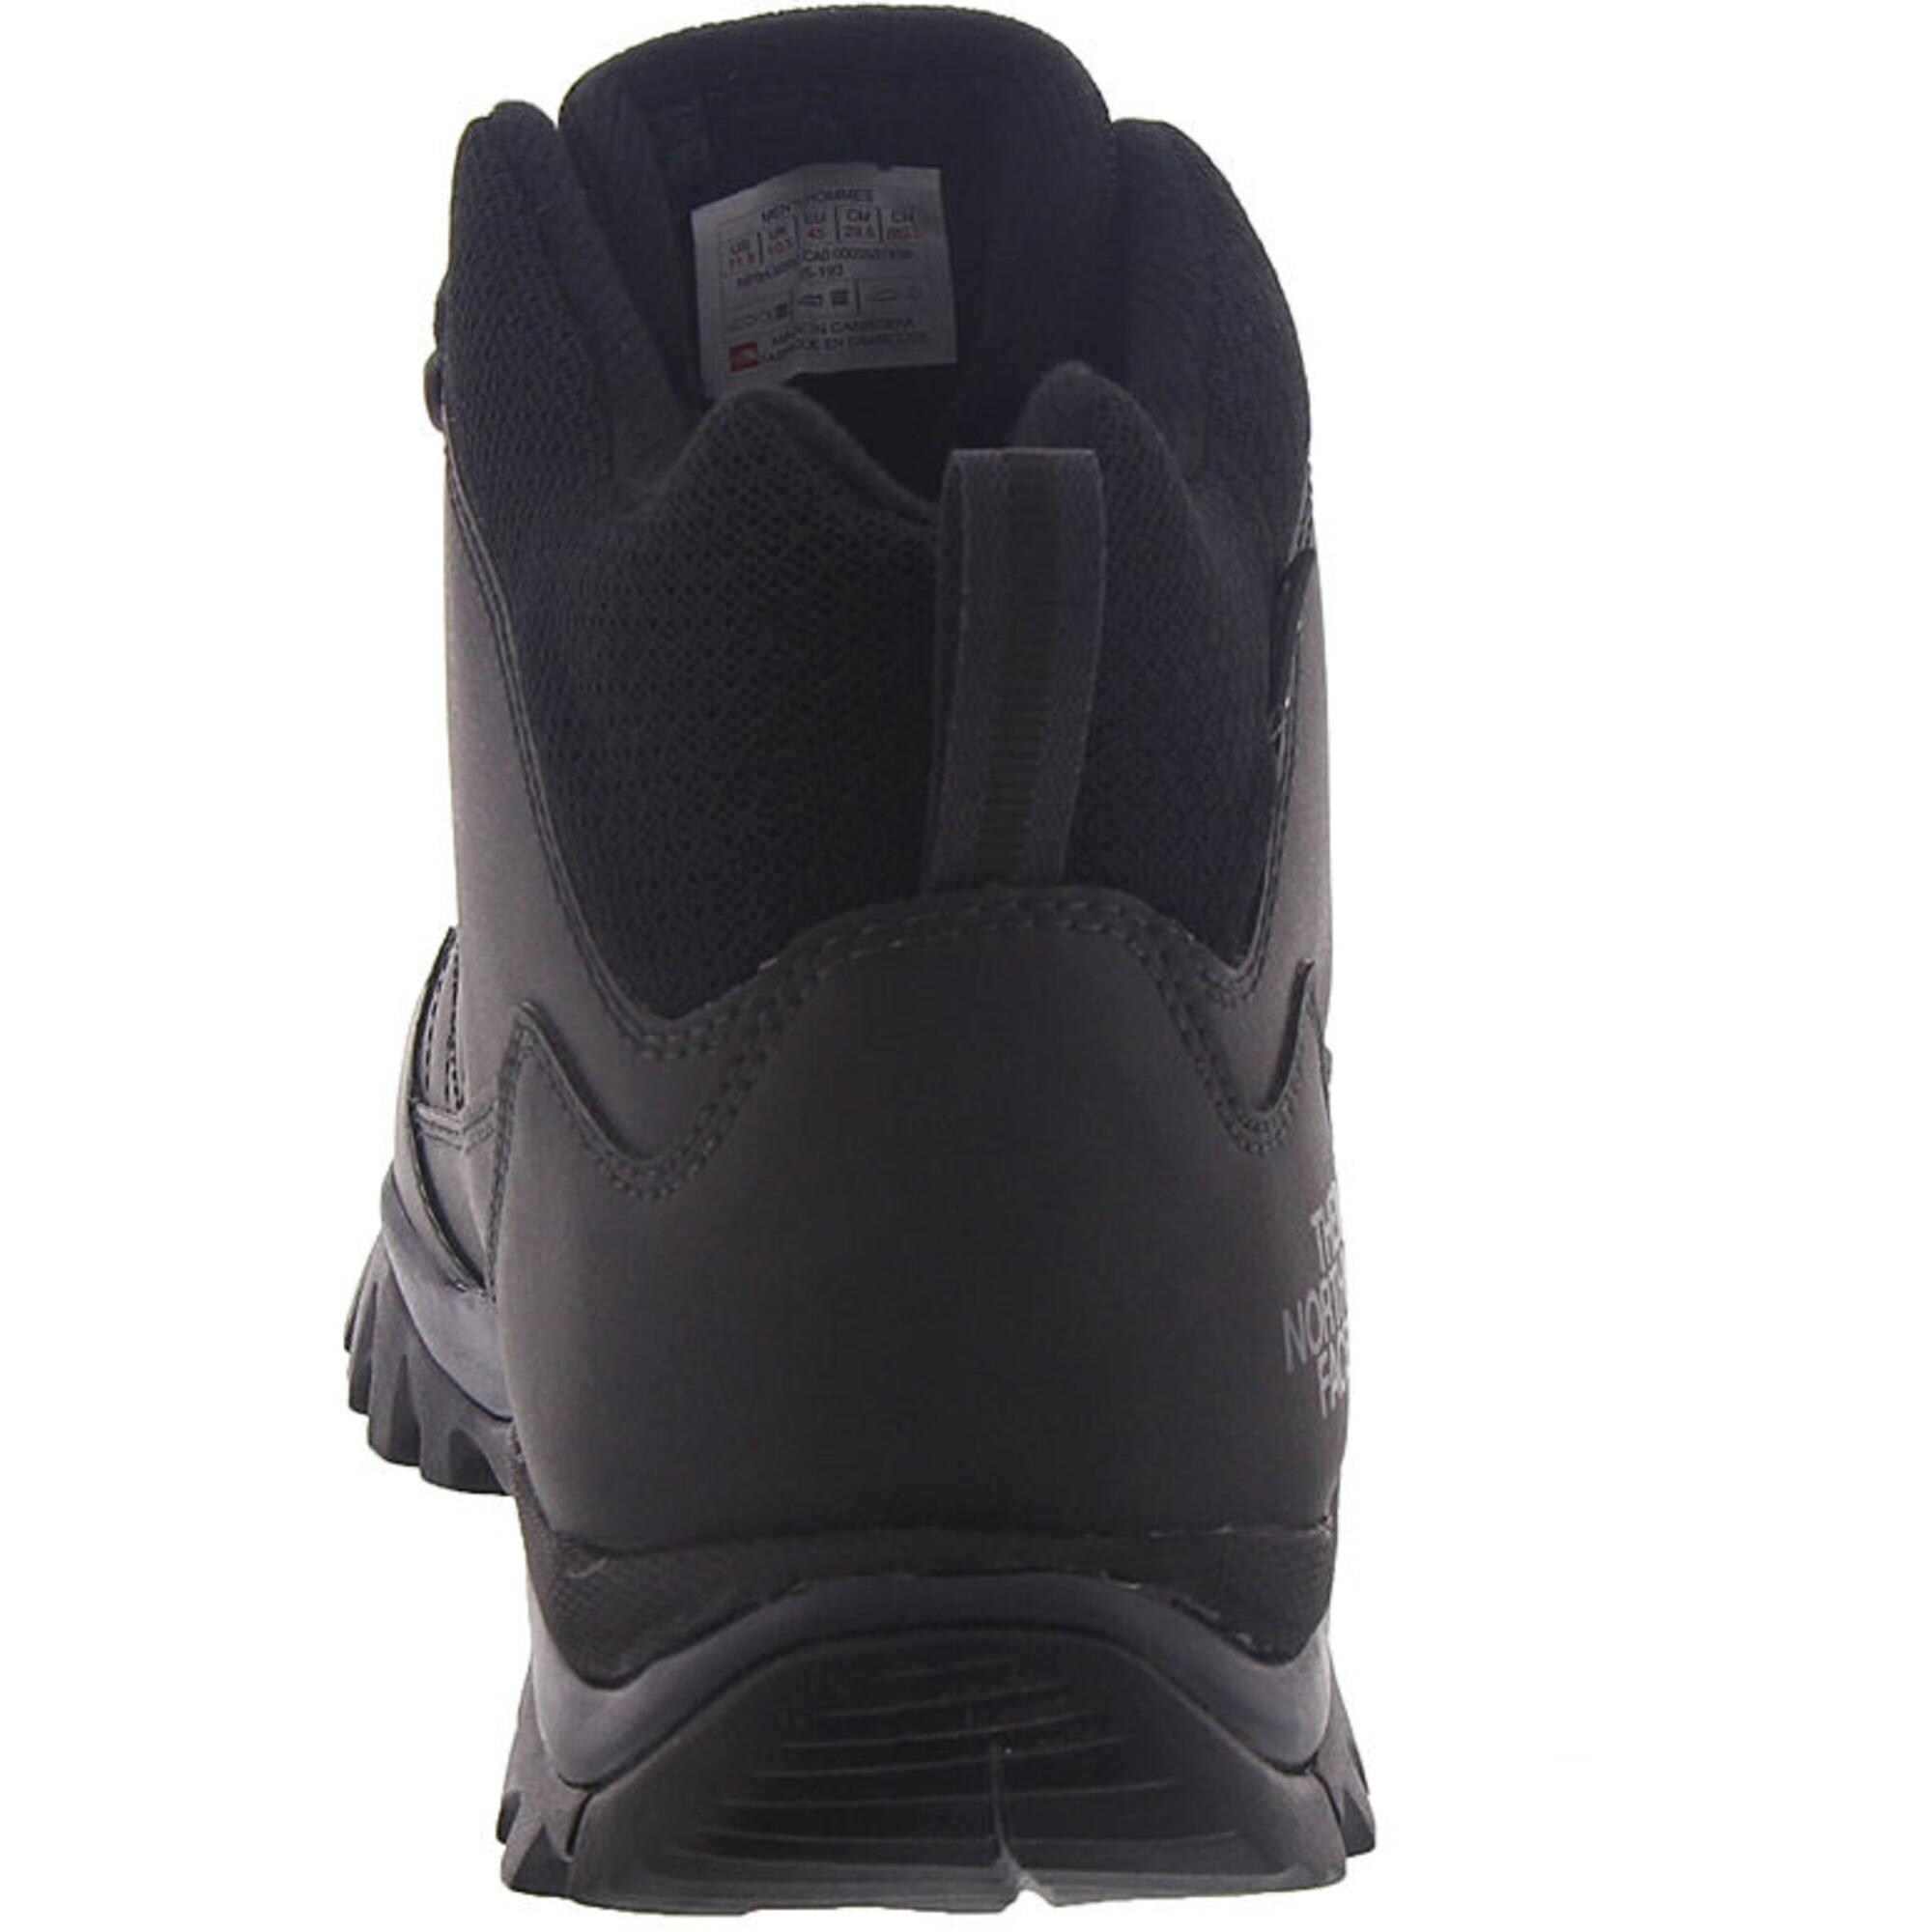 north face storm strike walking boots